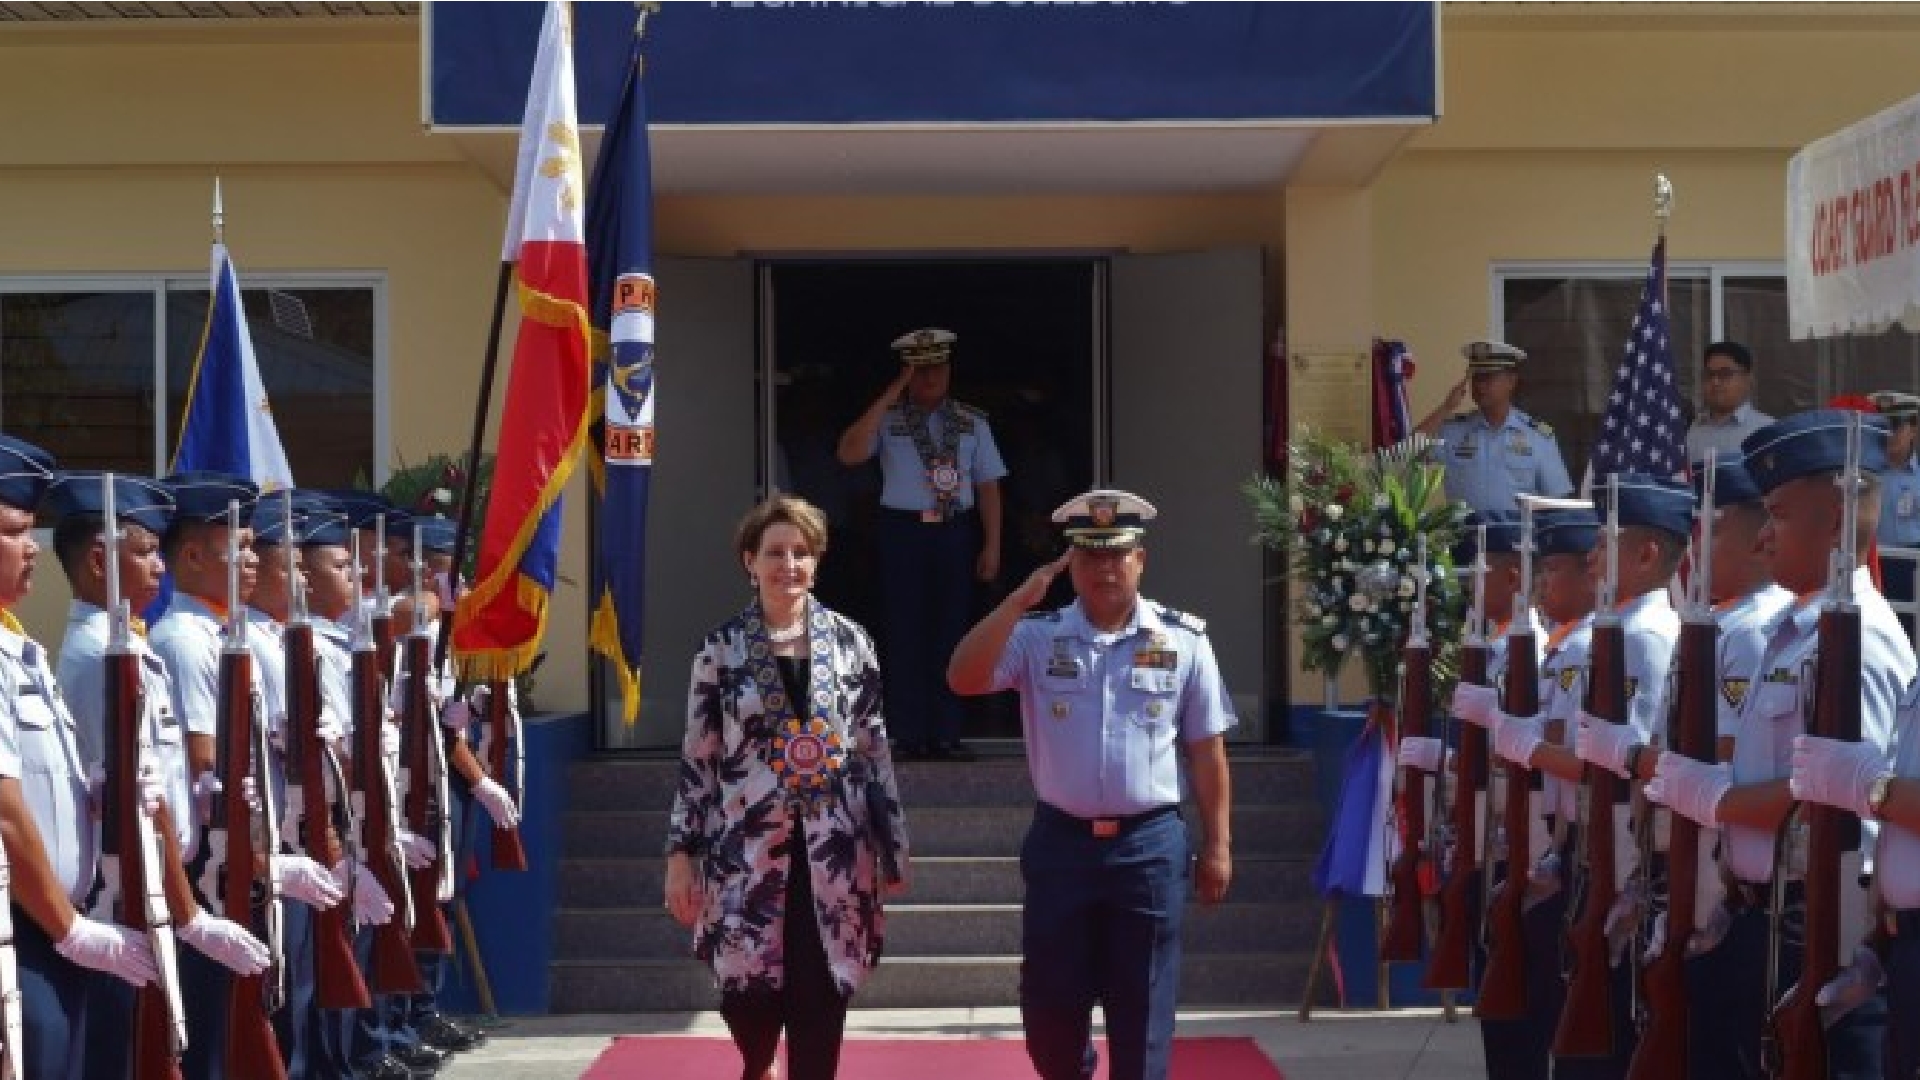 The US government provides a P250 million training facility to PCG.